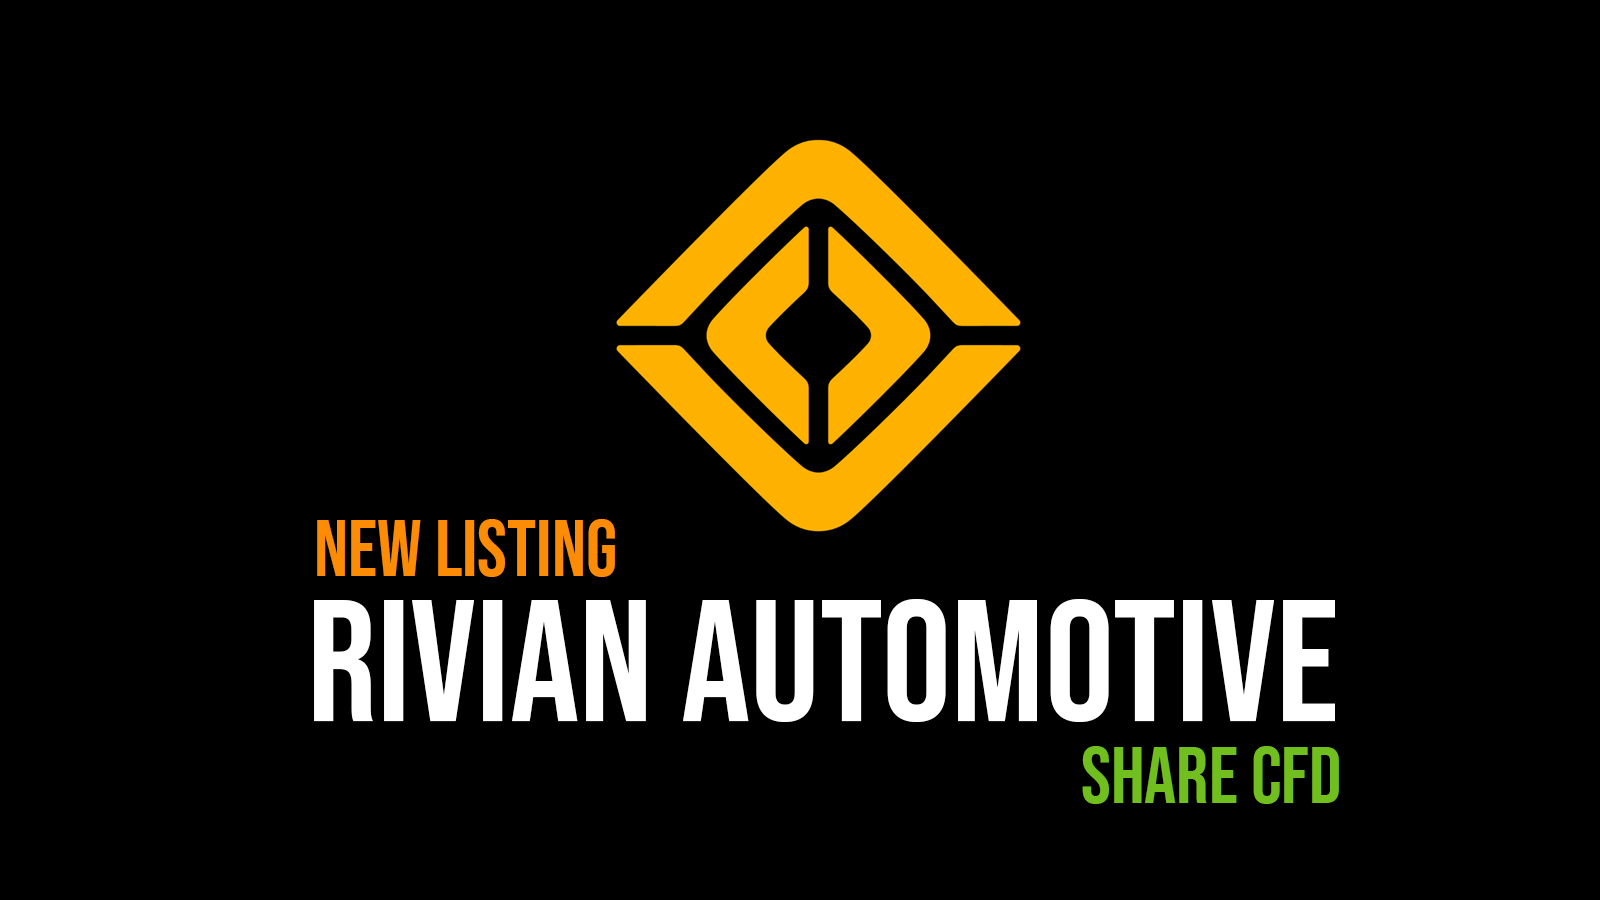 Rivian Automotive Share CFD is now available